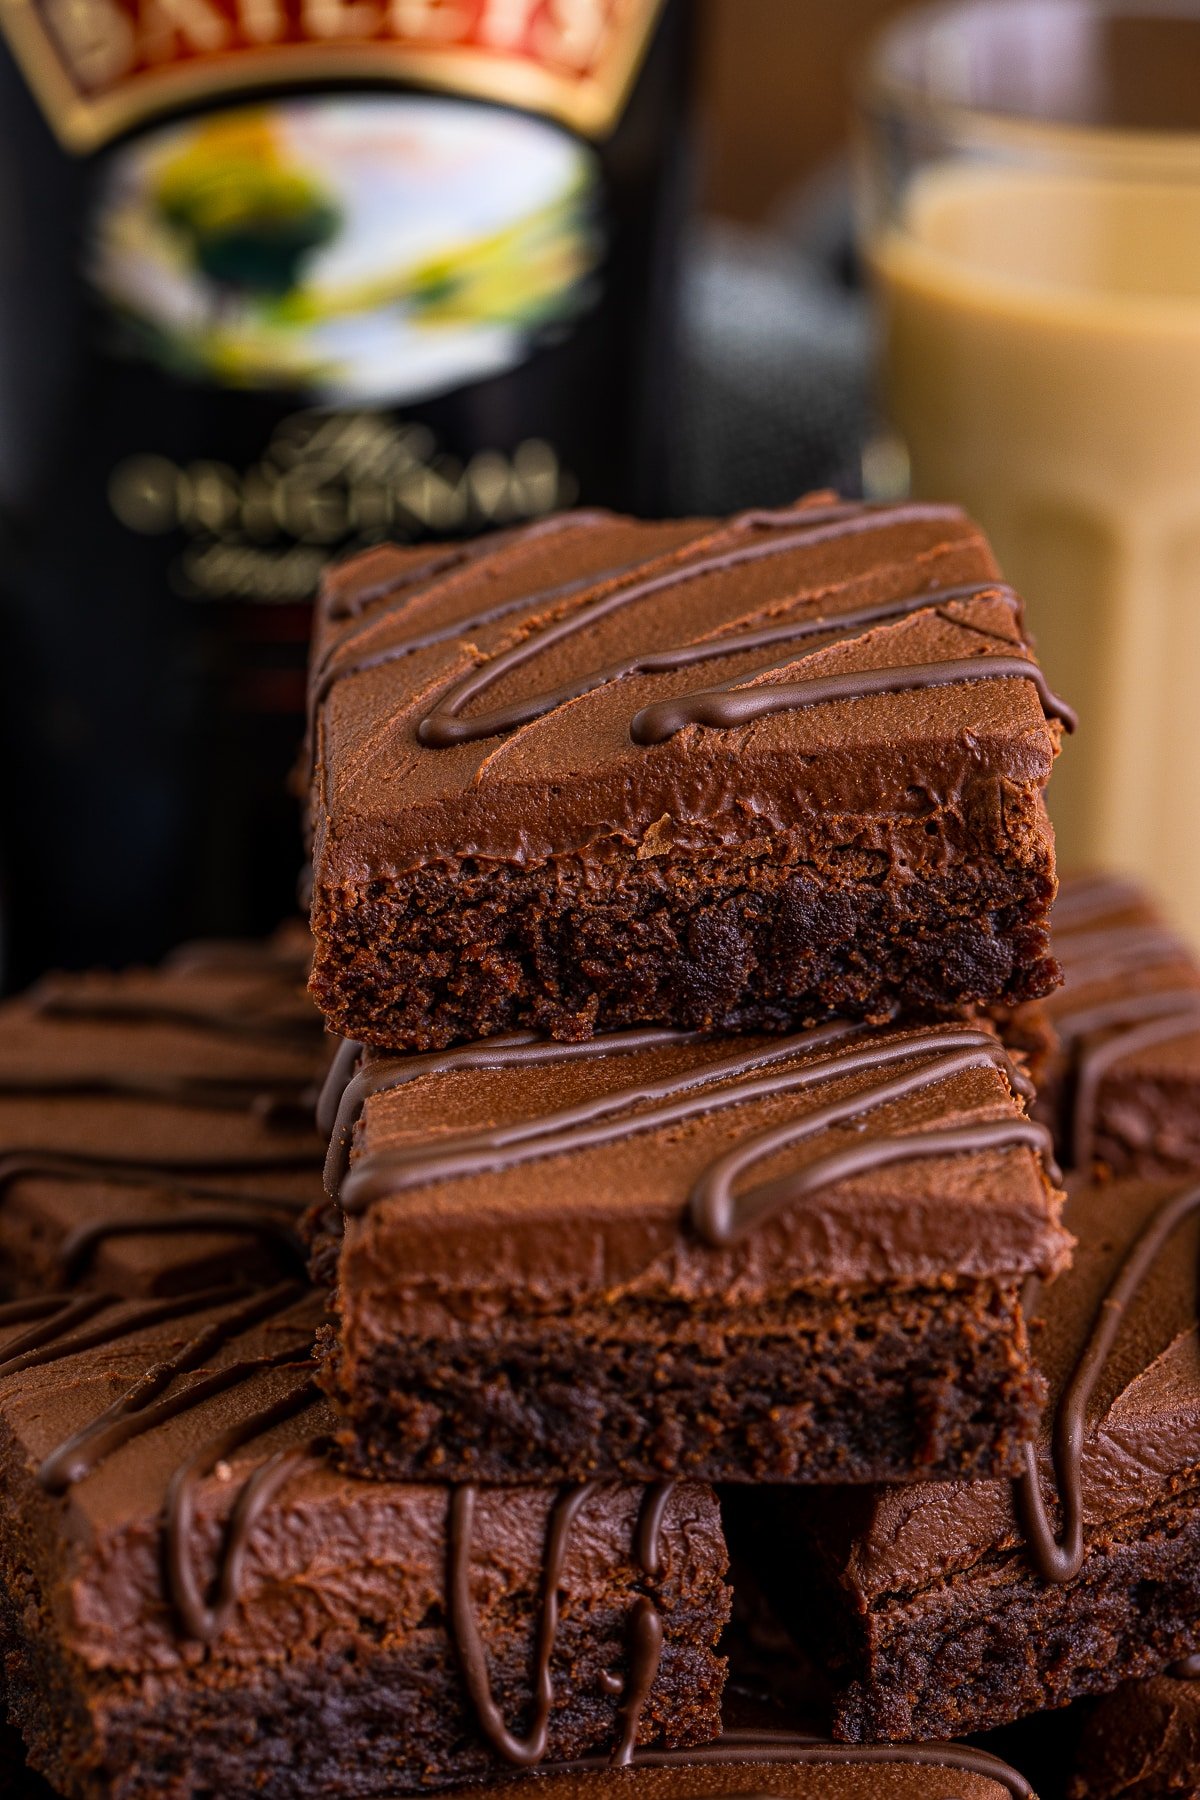 A stacked platter of Bailey's Brownies with more Irish cream and bottle in the background